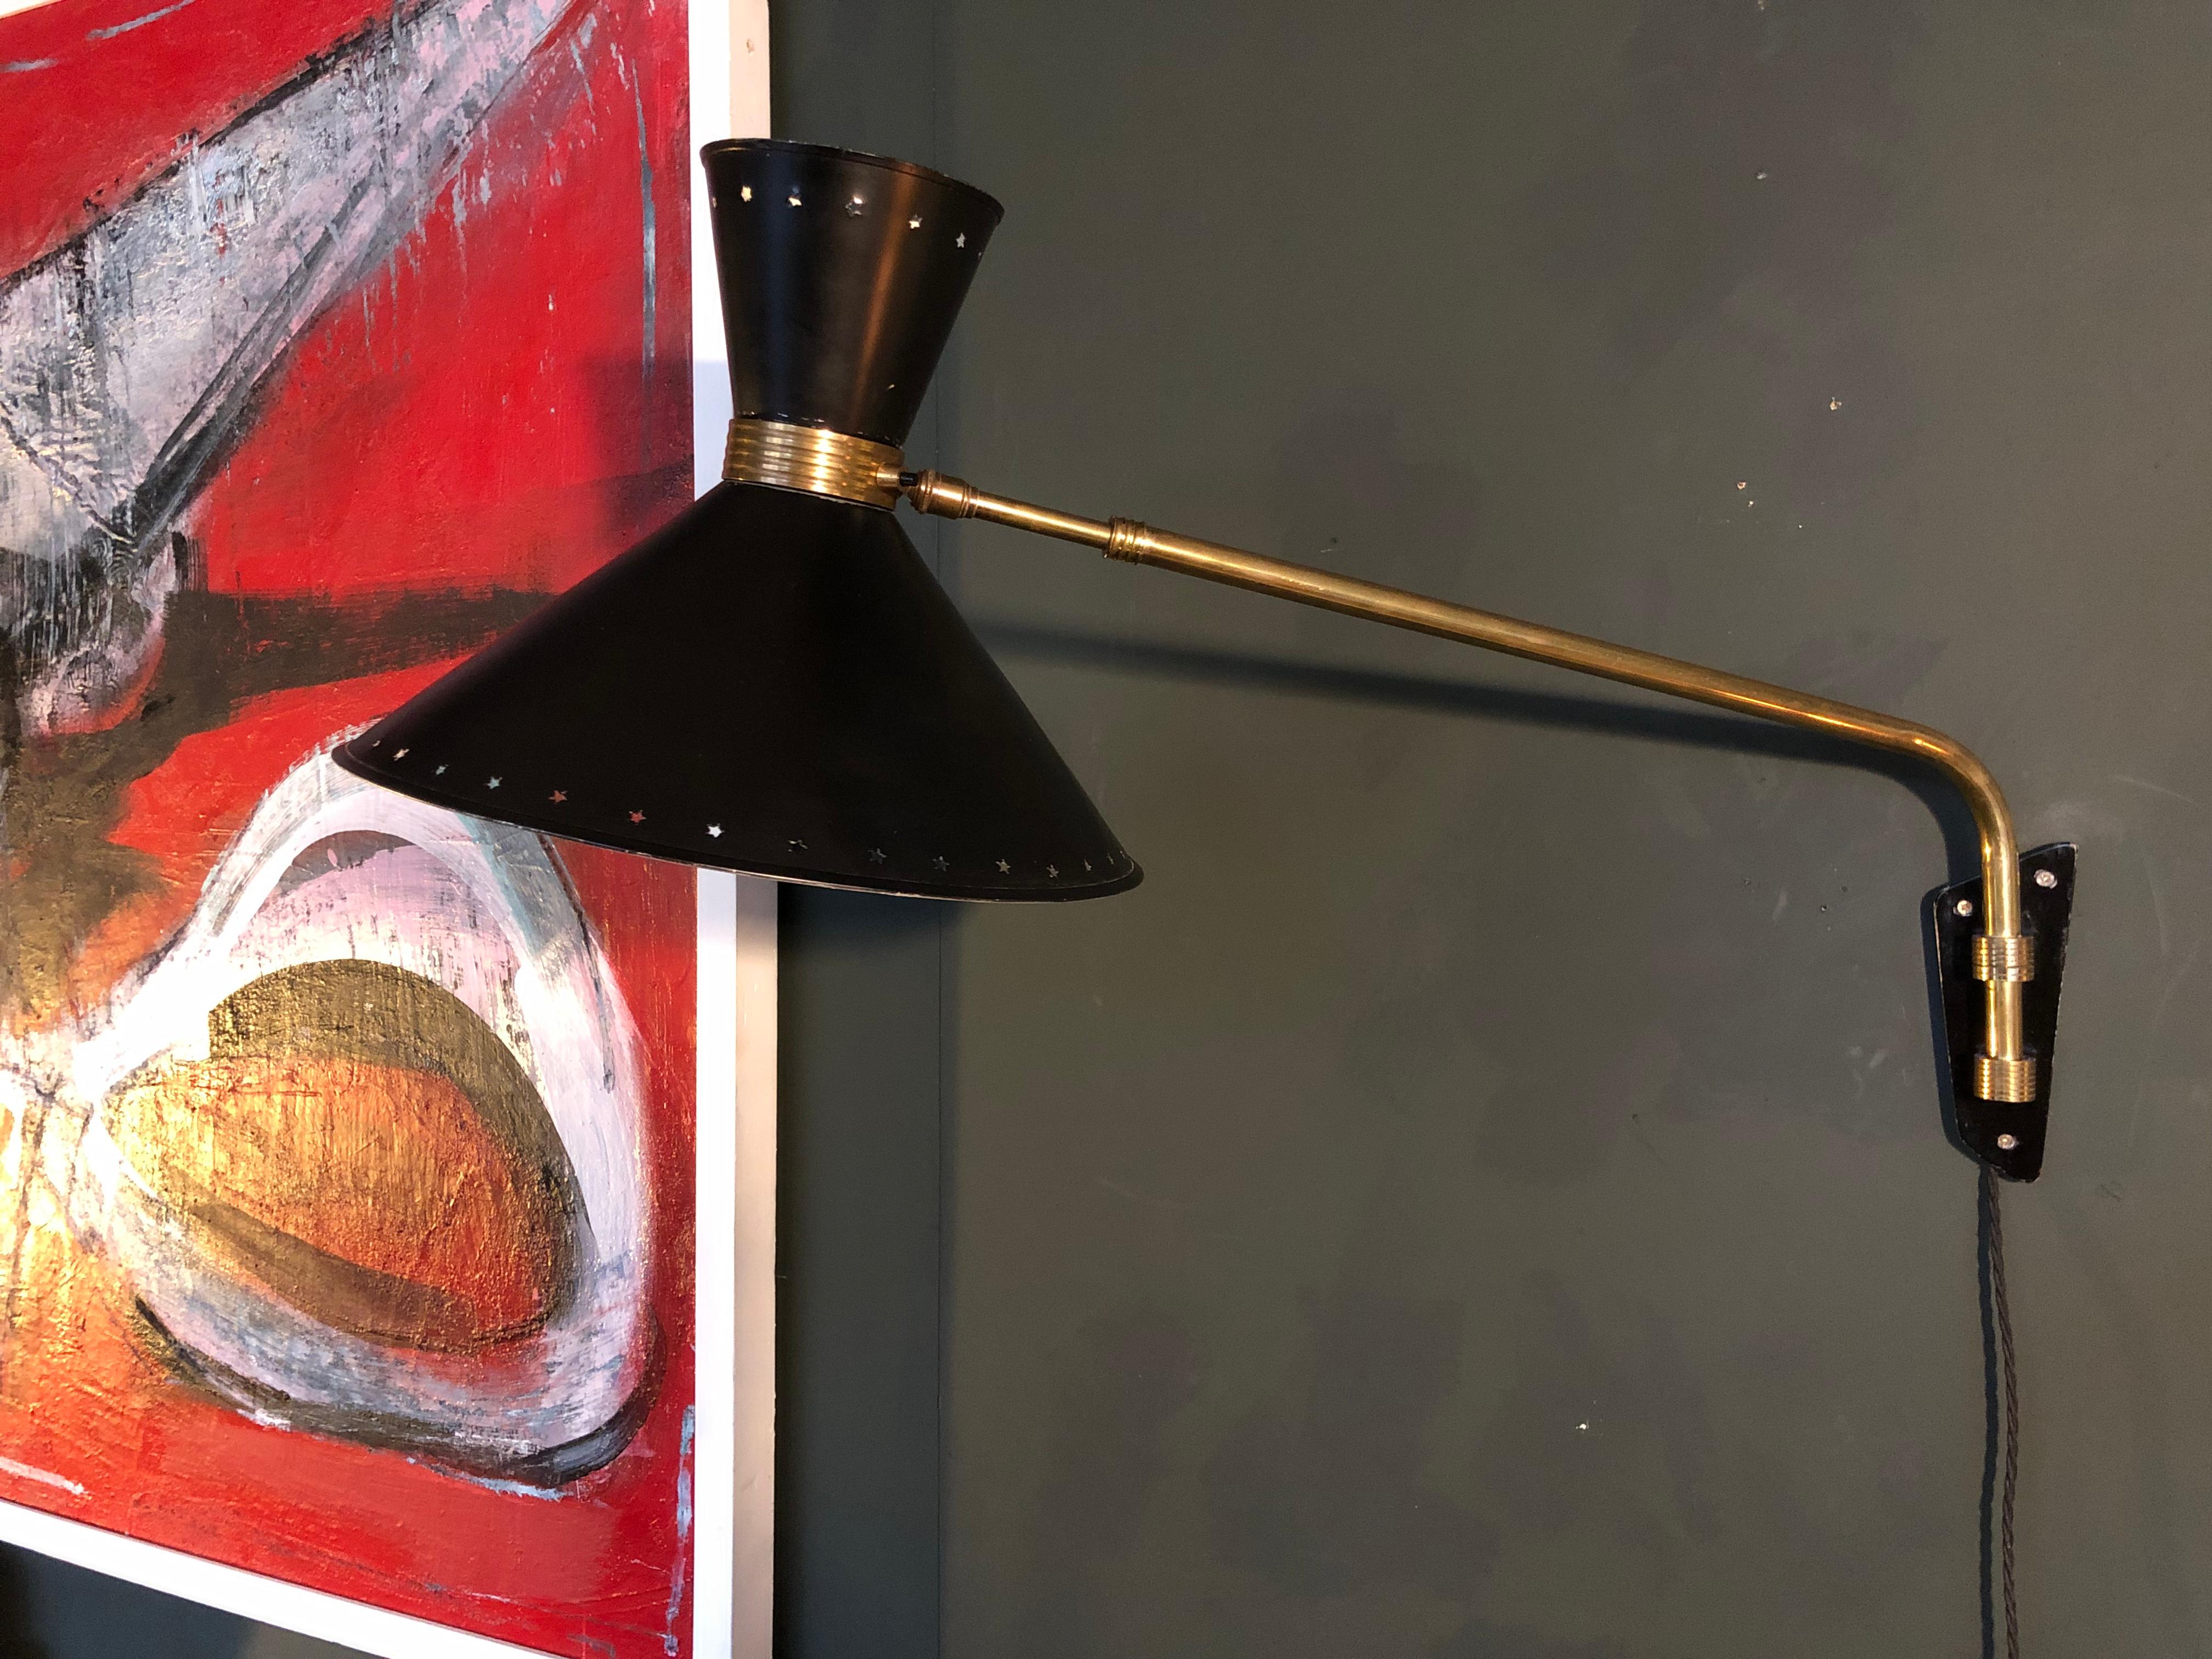 Large extending midcentury Diablo wall light in brass and black painted steel by Rene Matheiu, France, 1950s. Classic design. Top and bottom cones have separate lamp switches. Ball jointed adjustable head. Fully rewired.